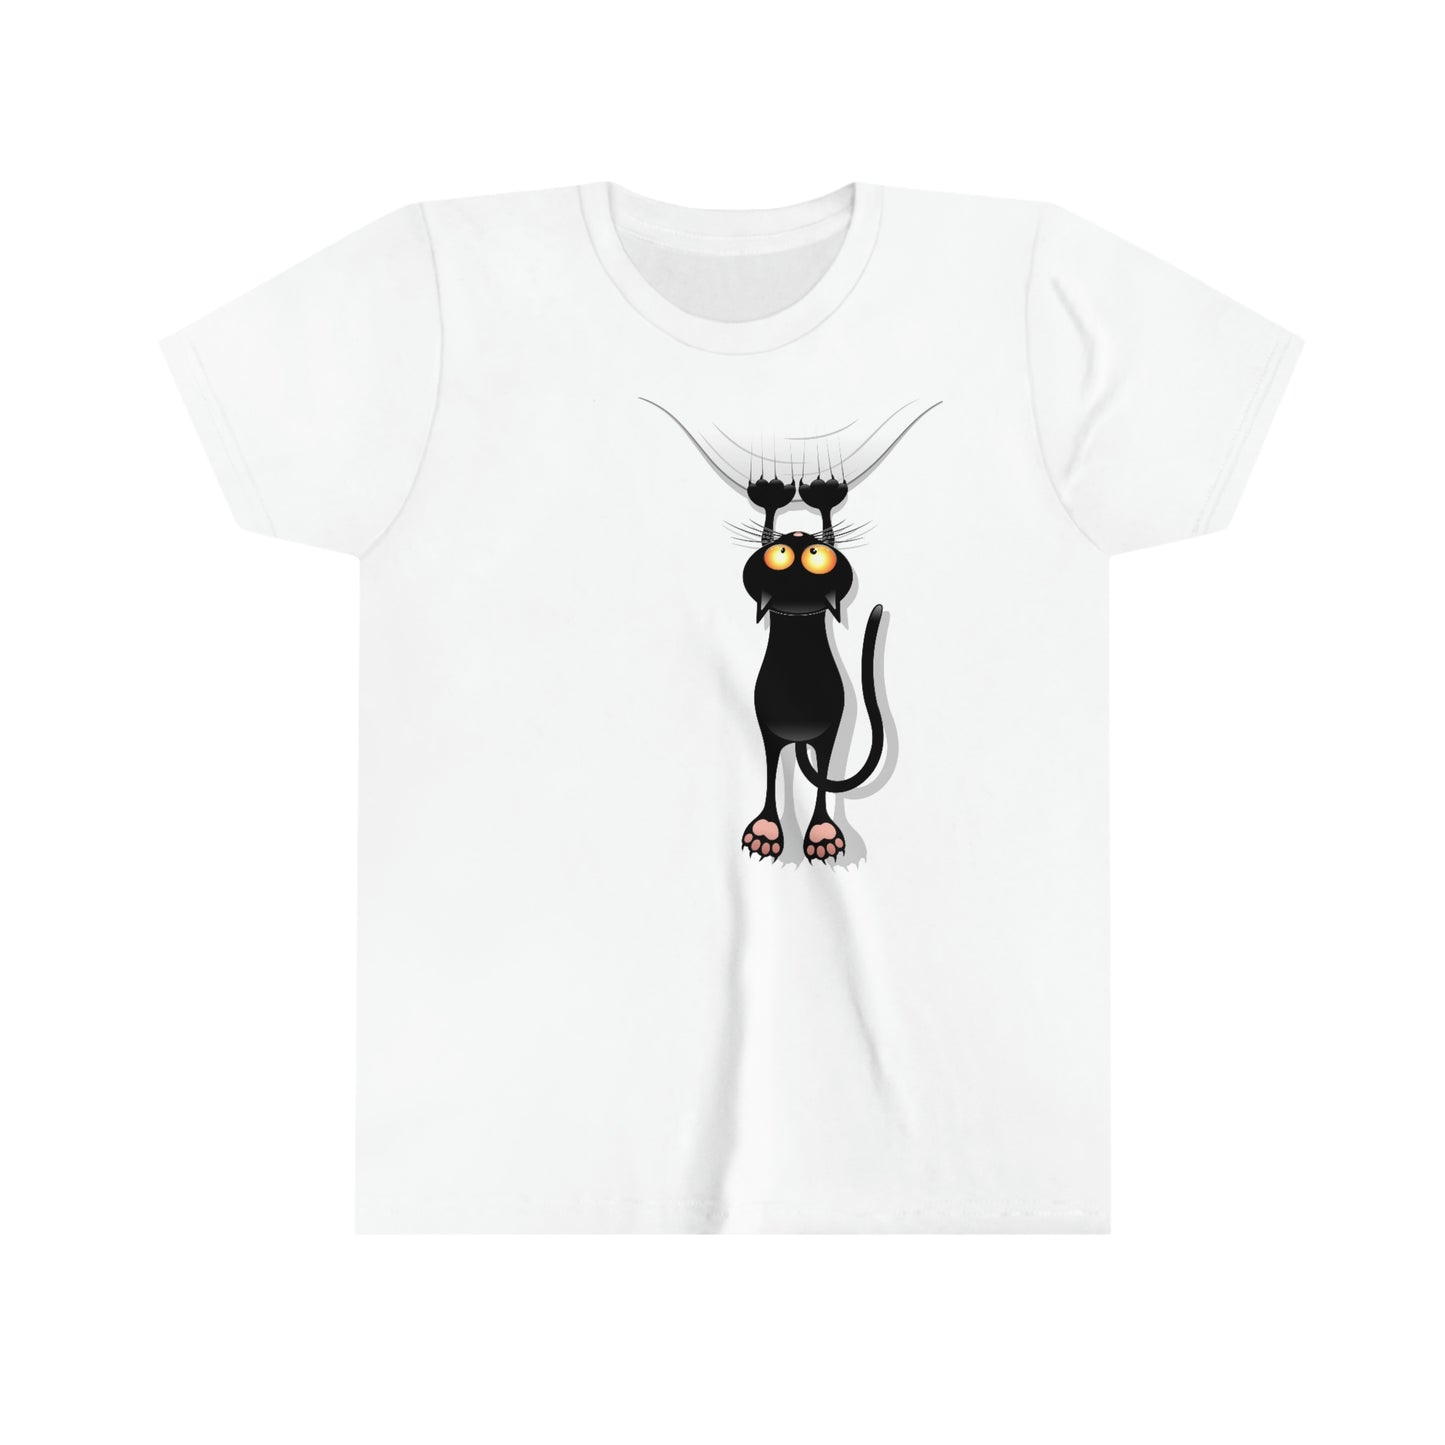 Youth Short Sleeve Tee "Funny Cat Cartoon Scratching Curtain"